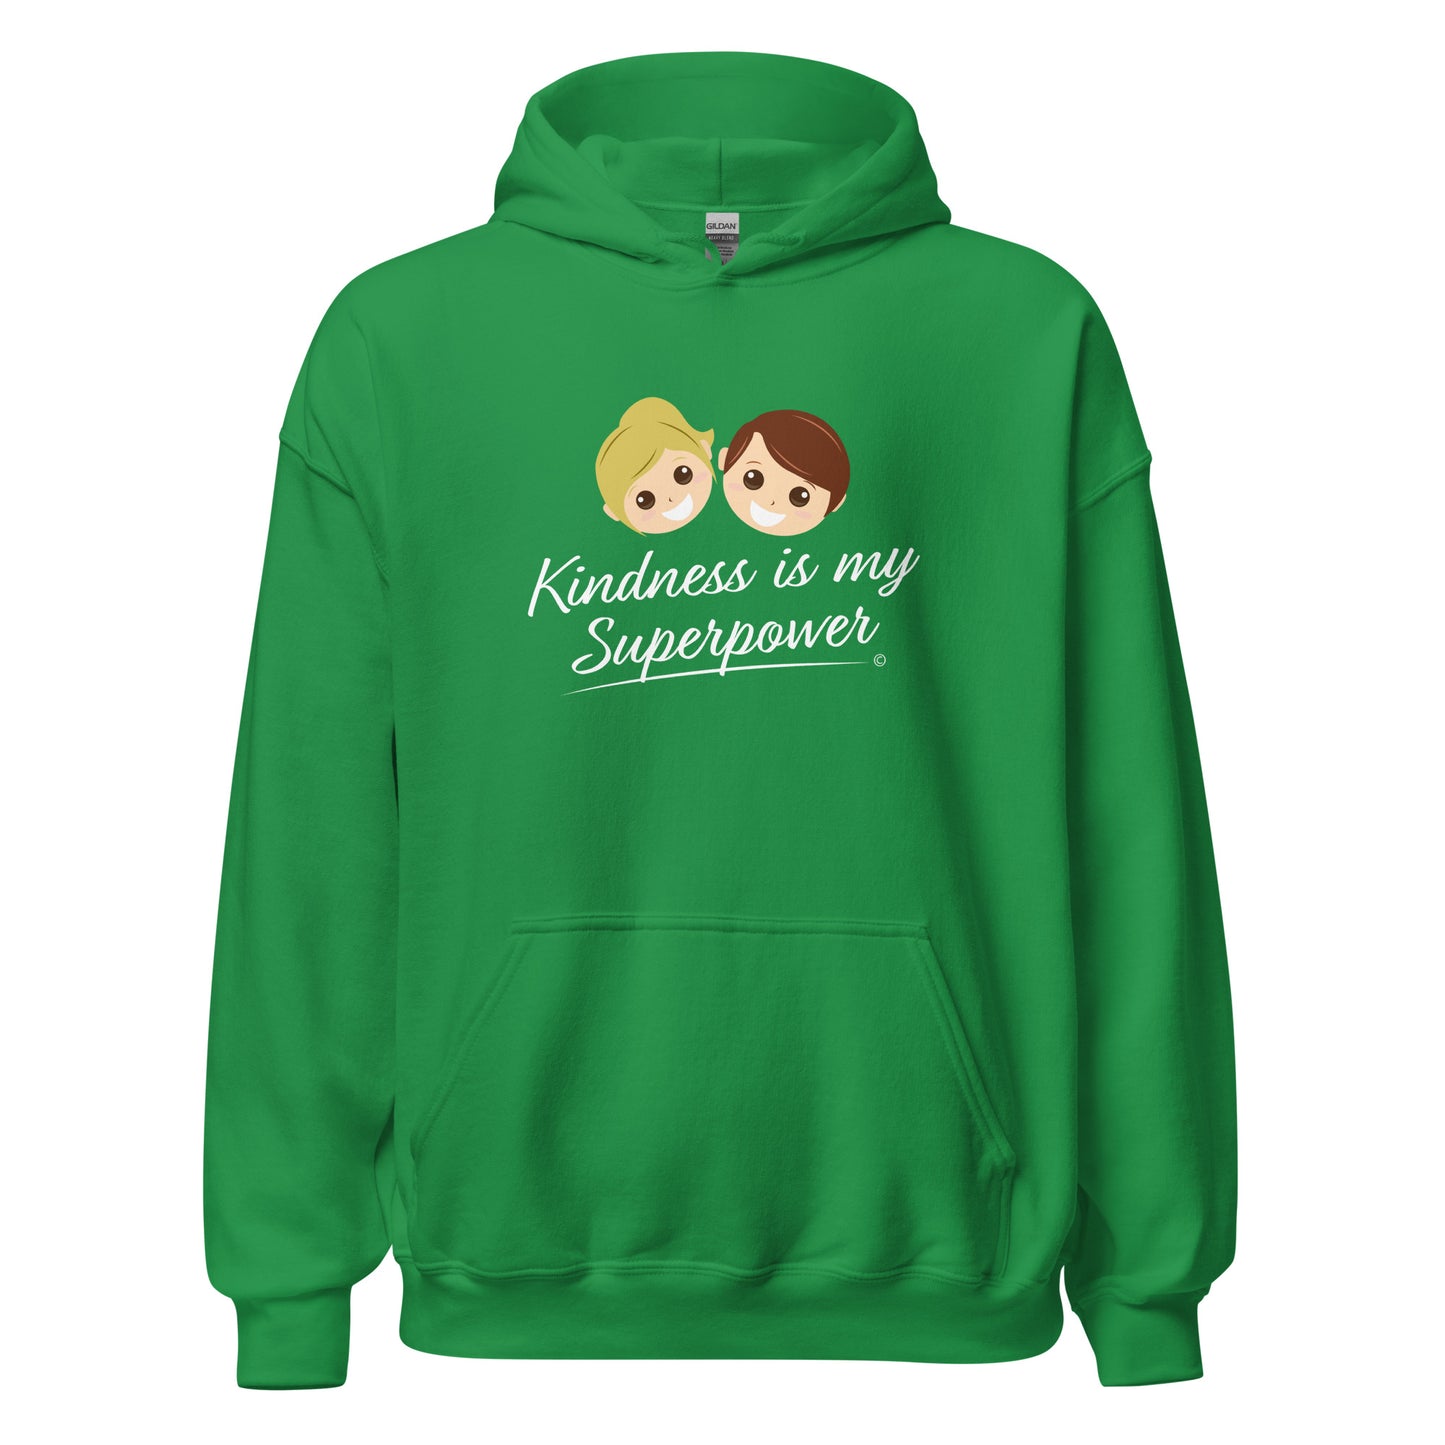 A cozy unisex hoodie in irish green featuring the uplifting quote 'Kindness is my Superpower' in bold lettering.